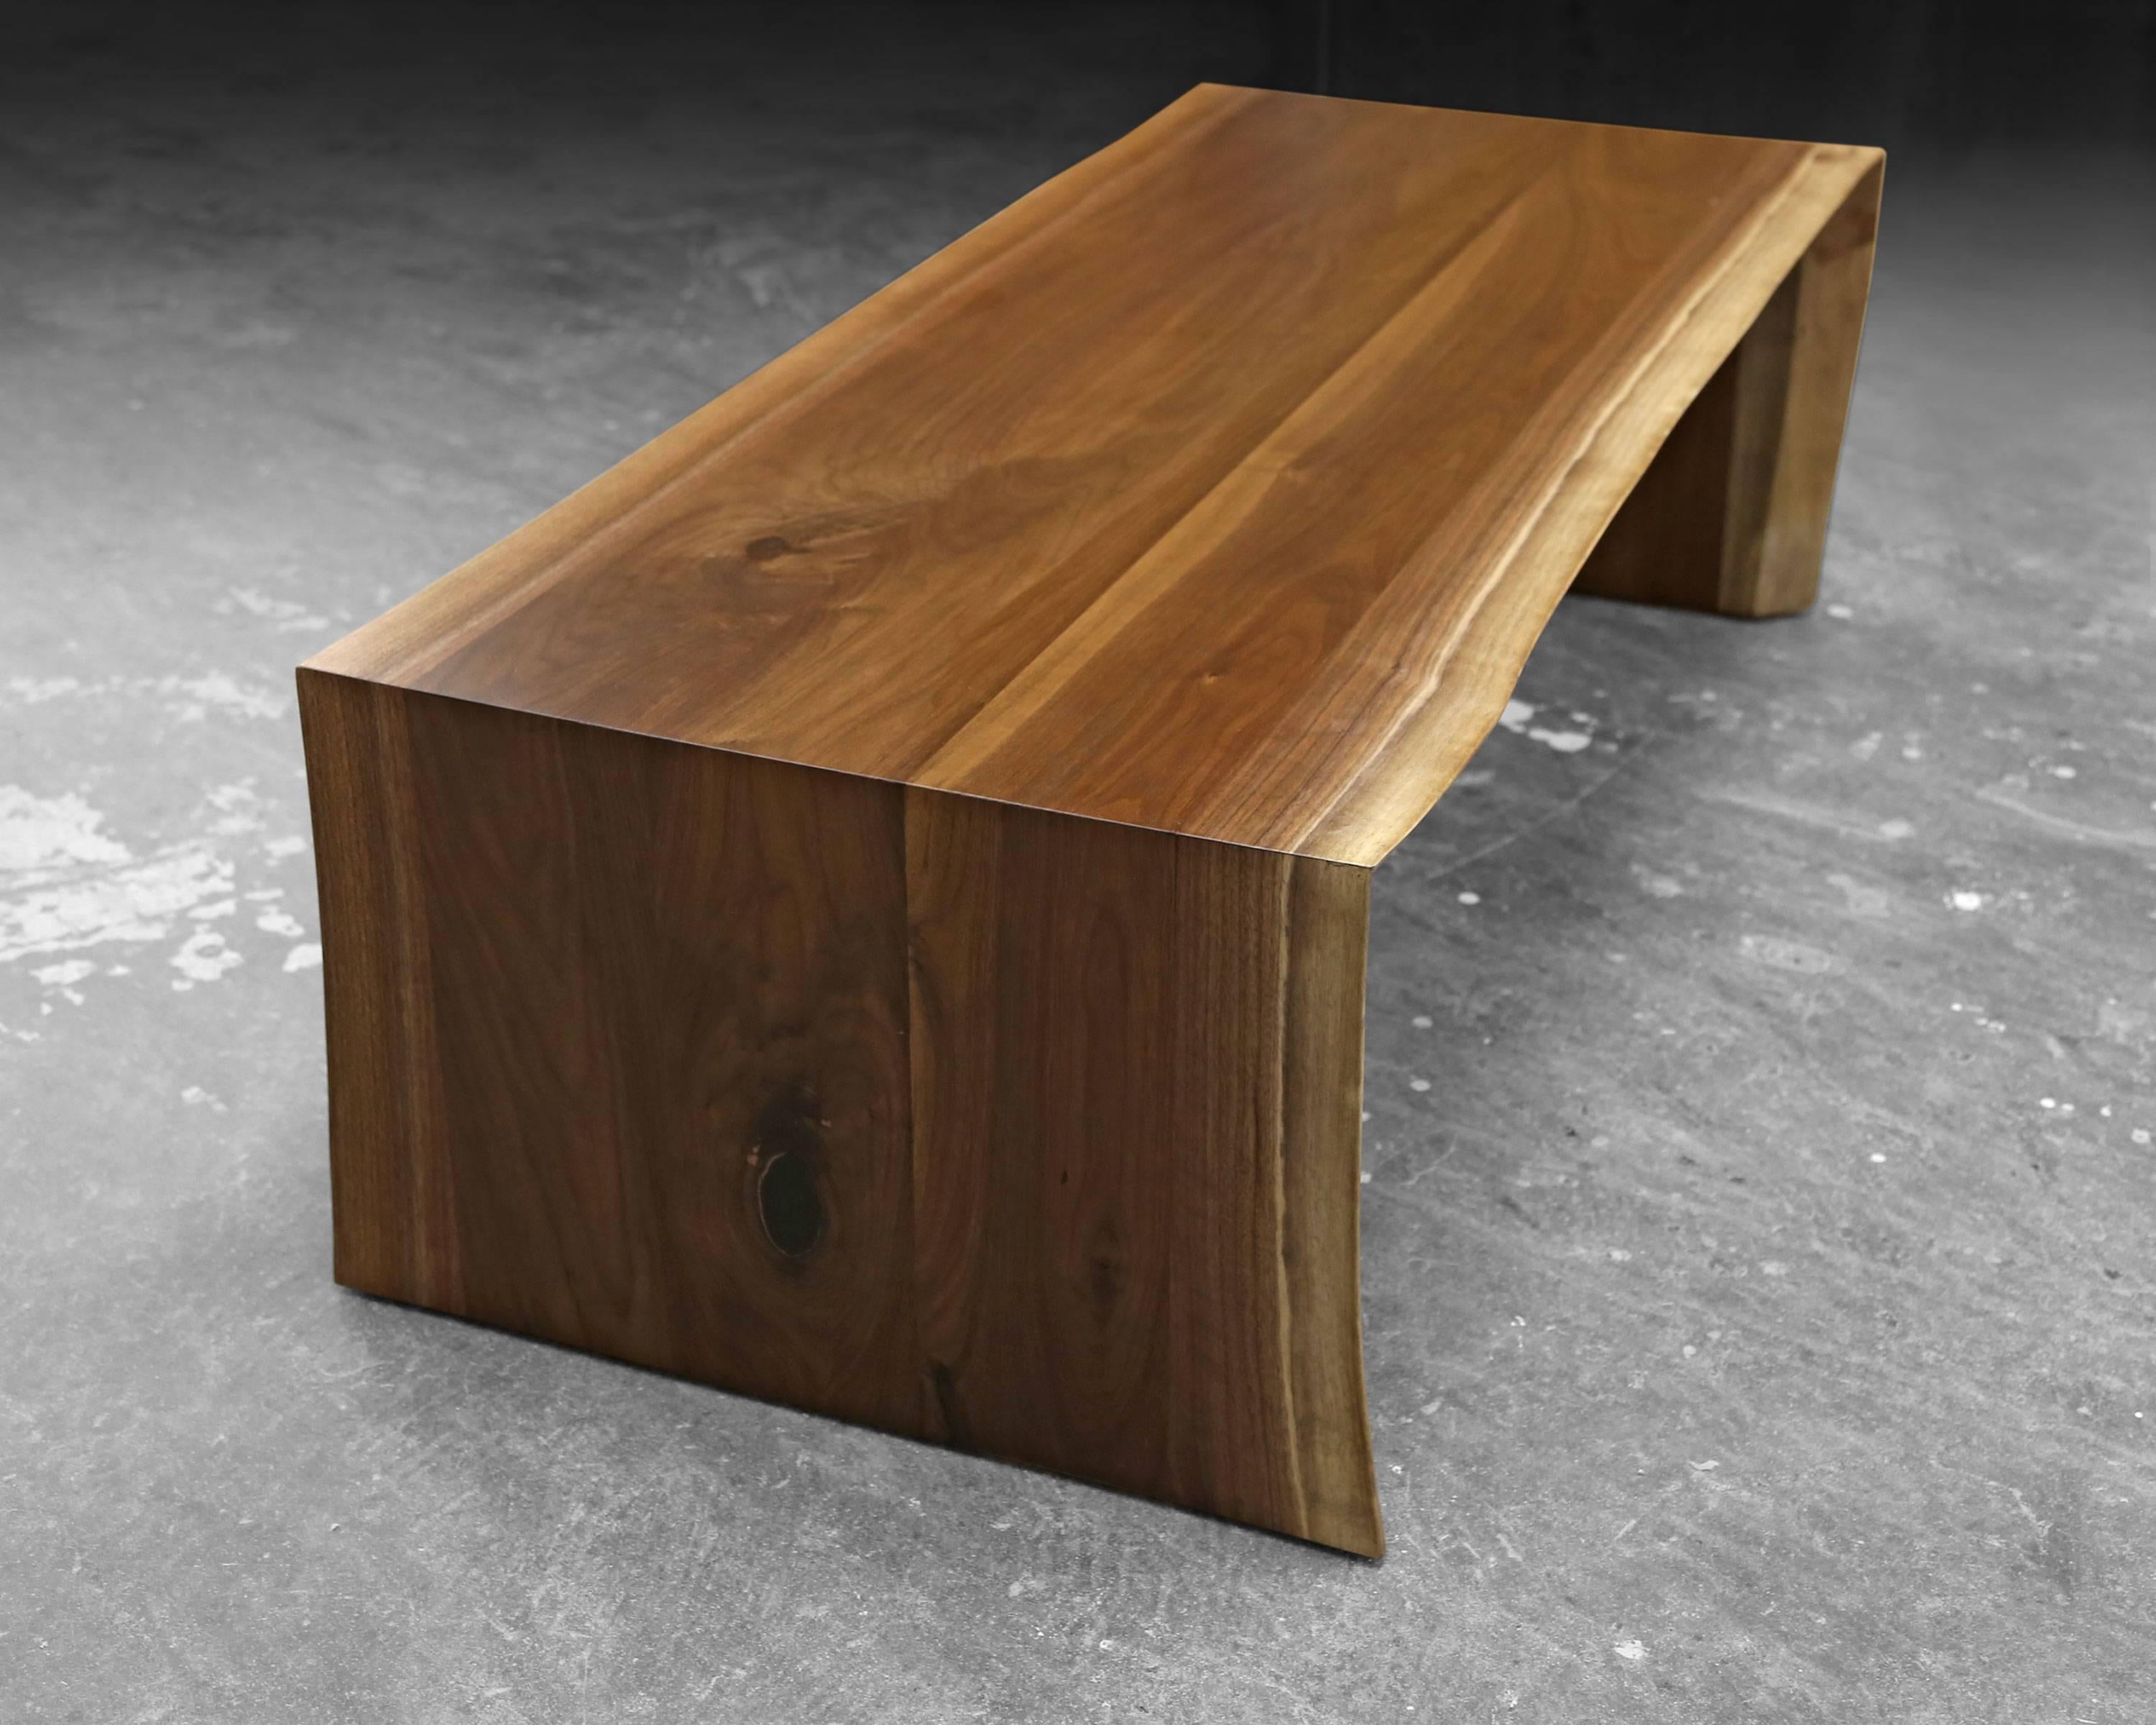 Hand-Crafted Sentient Folded Black Walnut Slab Live Edge Coffee Table For Sale